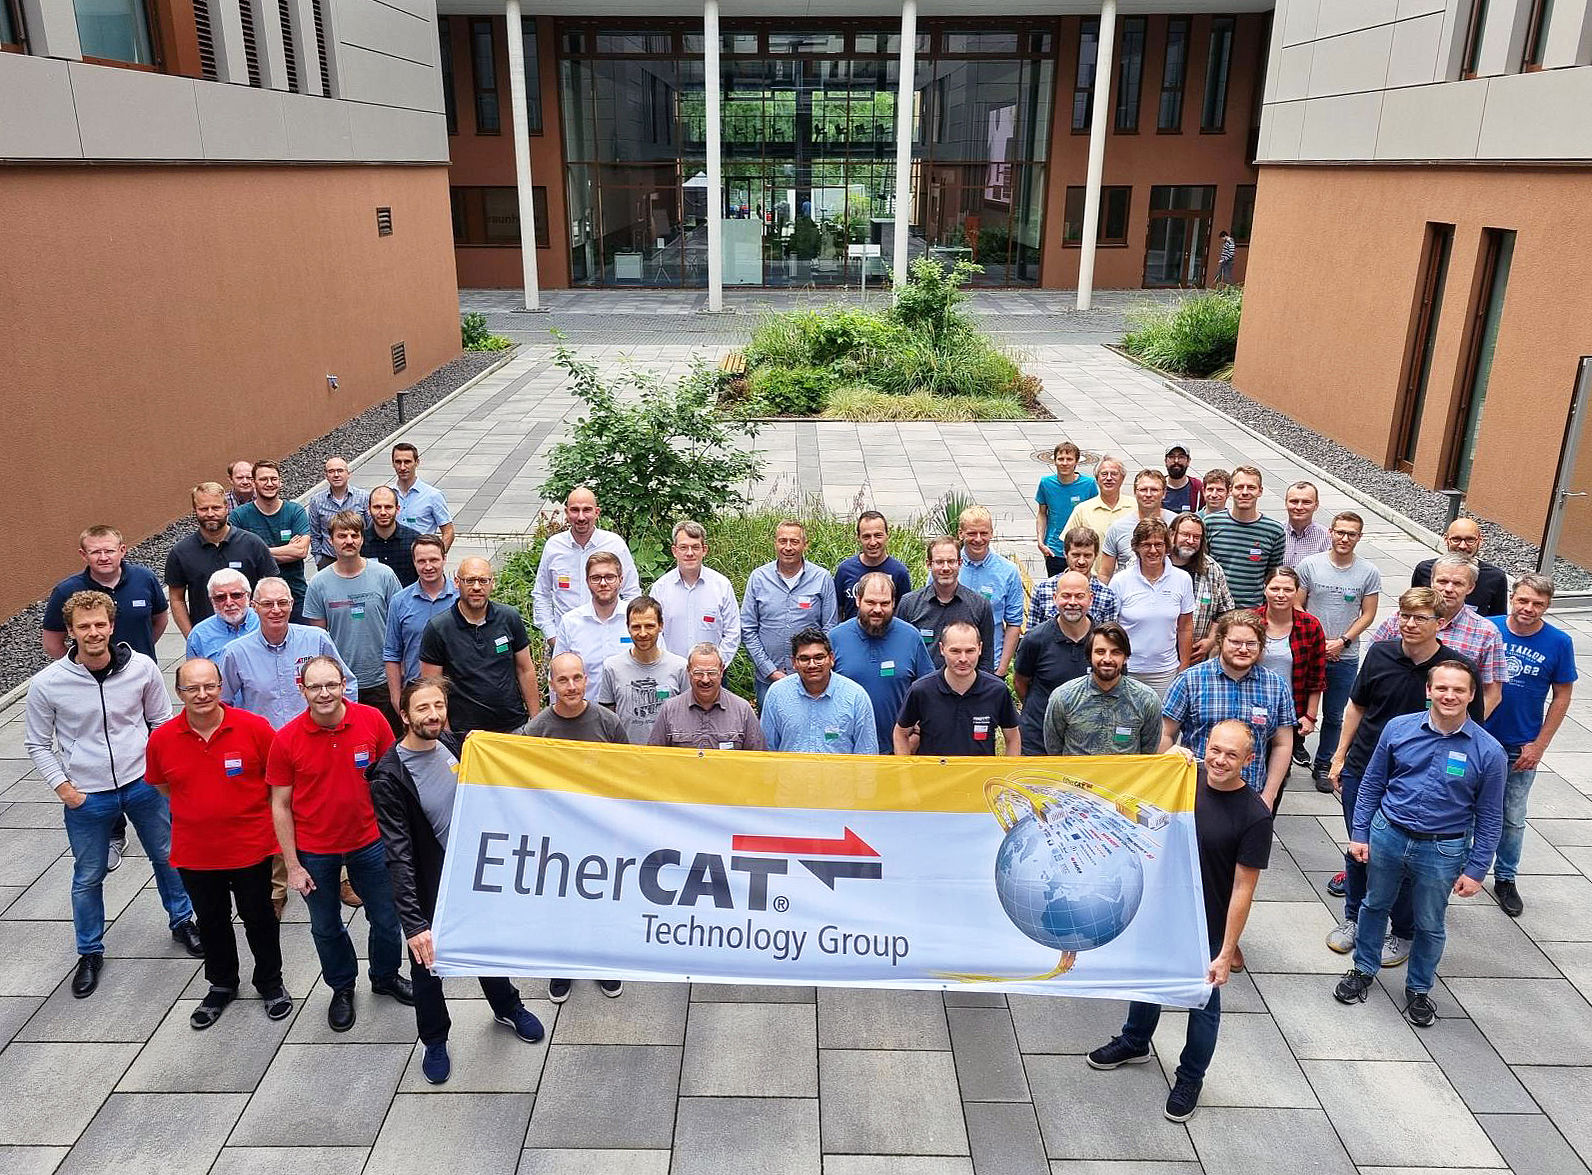 Passing tests convincingly at the EtherCAT Plugfest